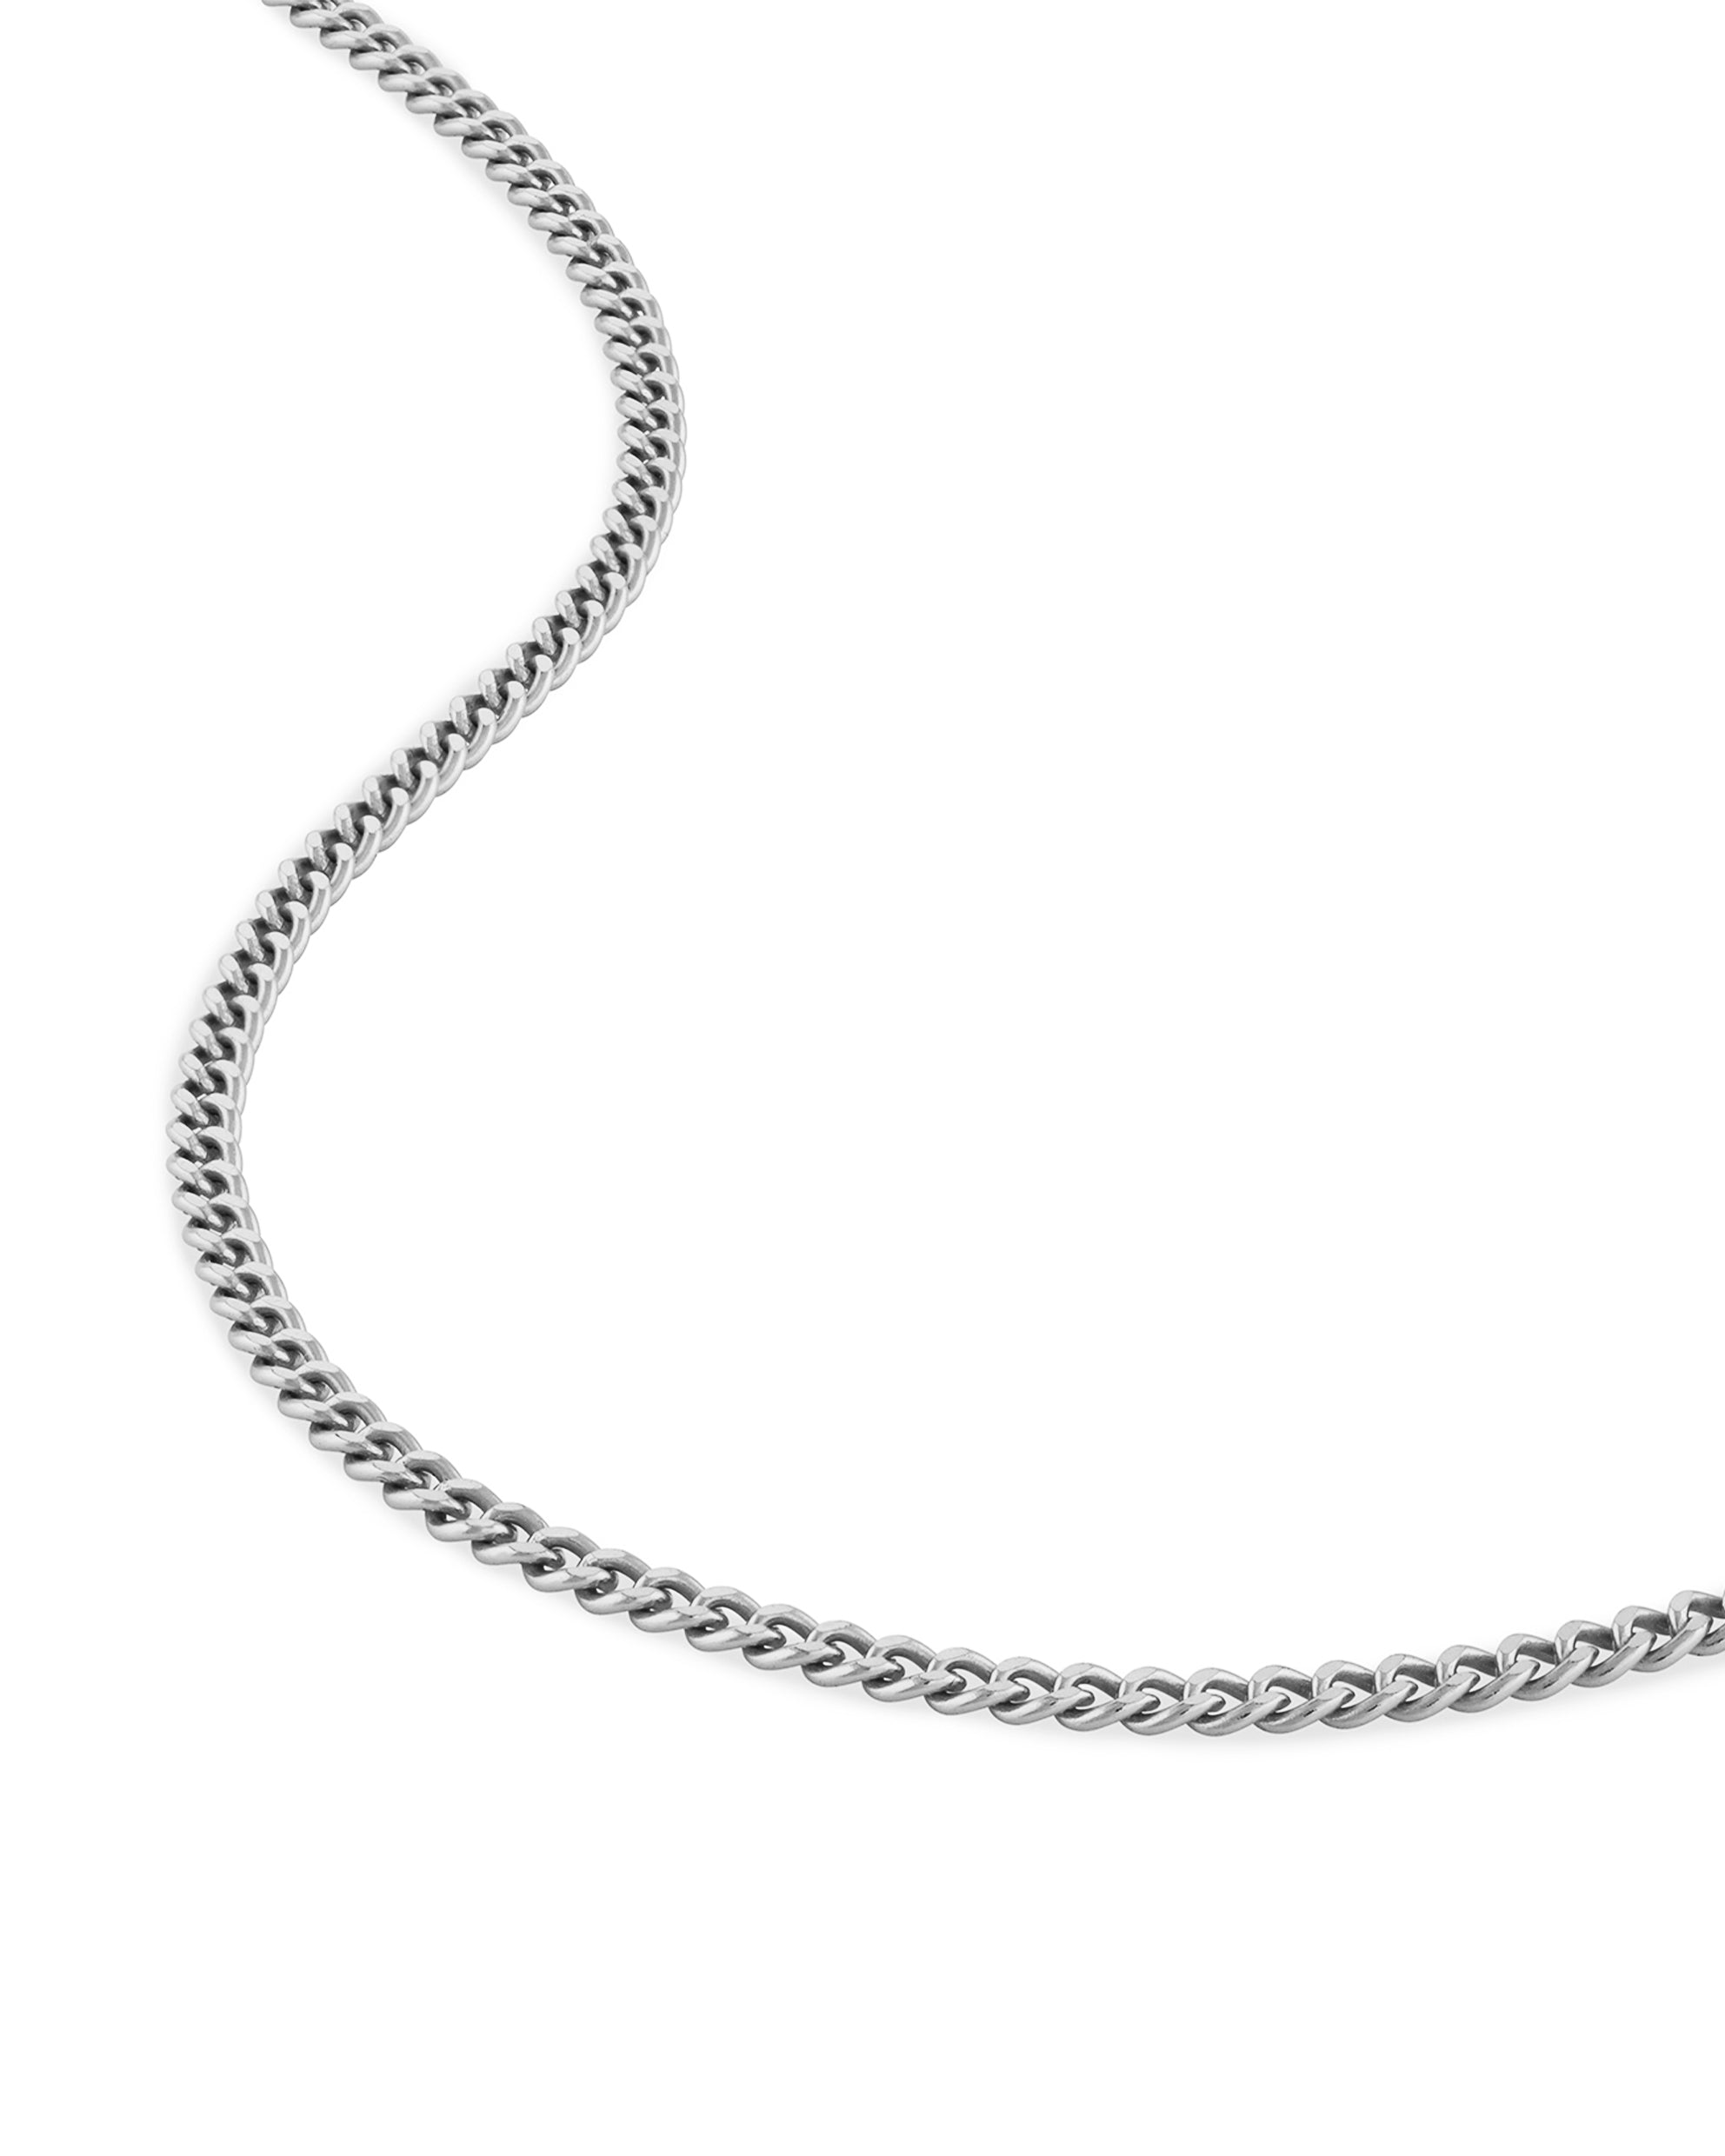 Mens Gunmetal Chain Necklace | 22 Inches | 6mm Width | Topgun | Mens Gift Idea January Sales